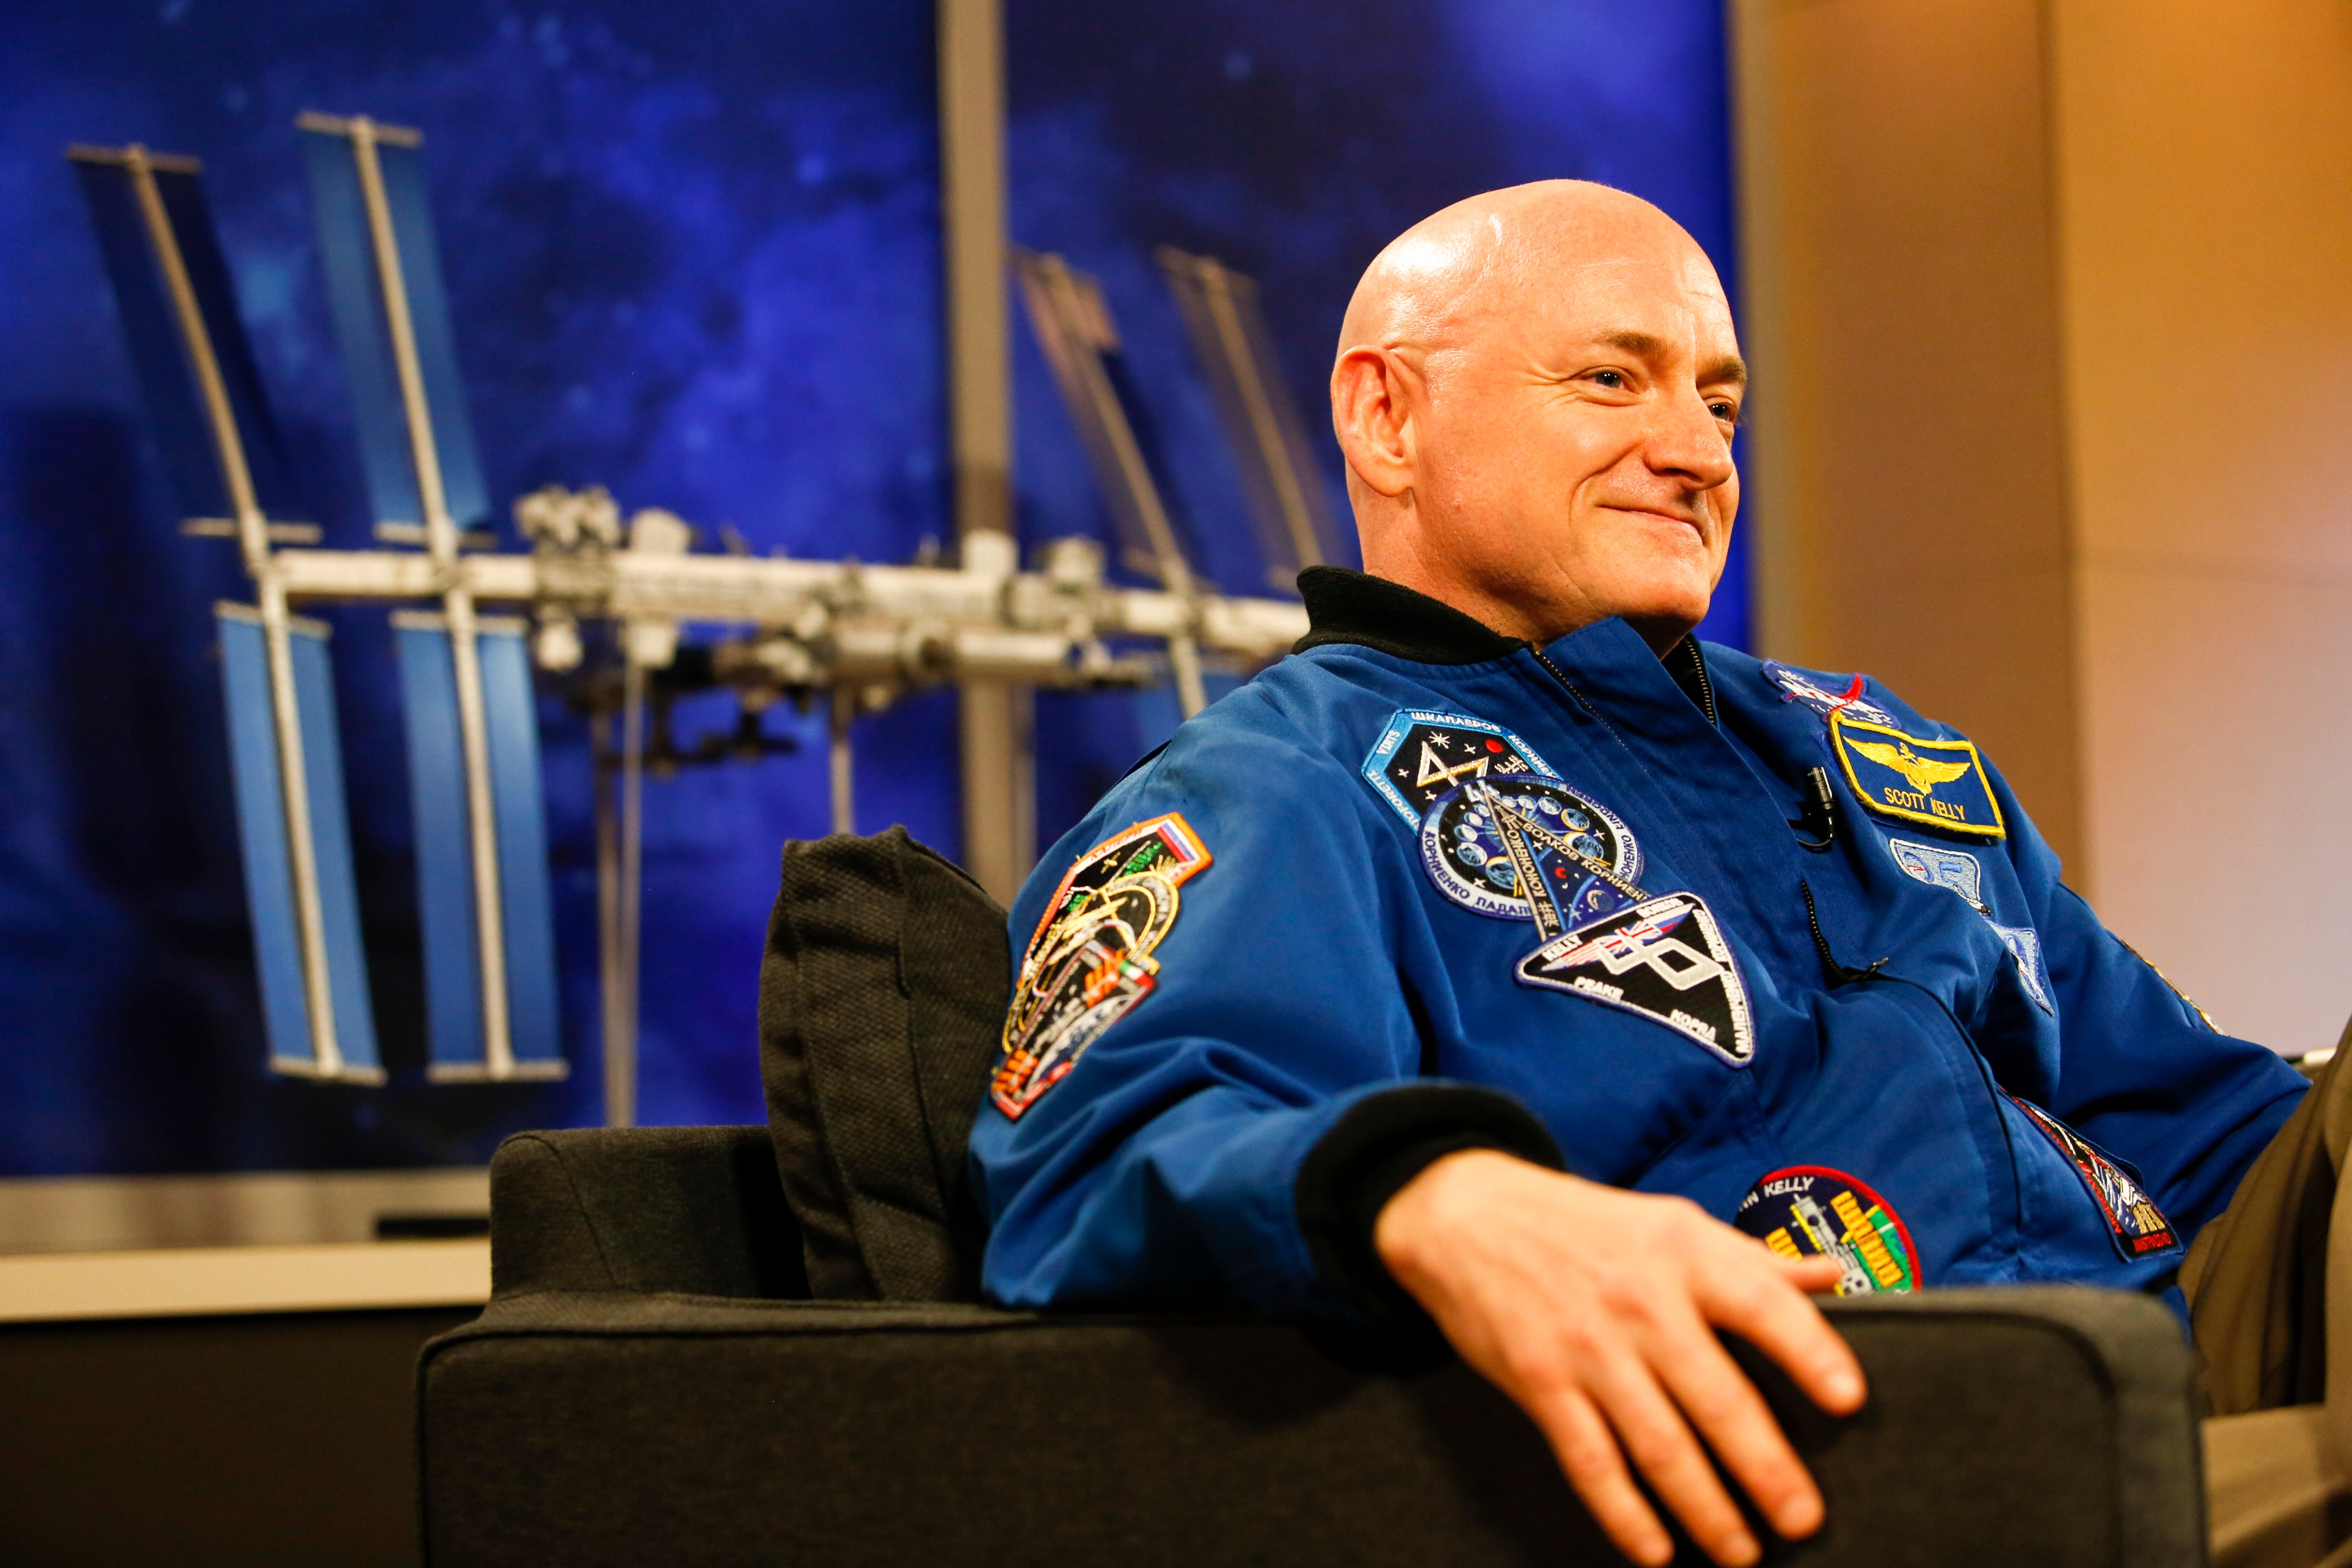 NASA Astronaut Scott Kelly speaks to the media after returning from a one year mission in space at the Johnson Space Center in Texas on March 4, 2016. (Eric Kayne—Getty Images)